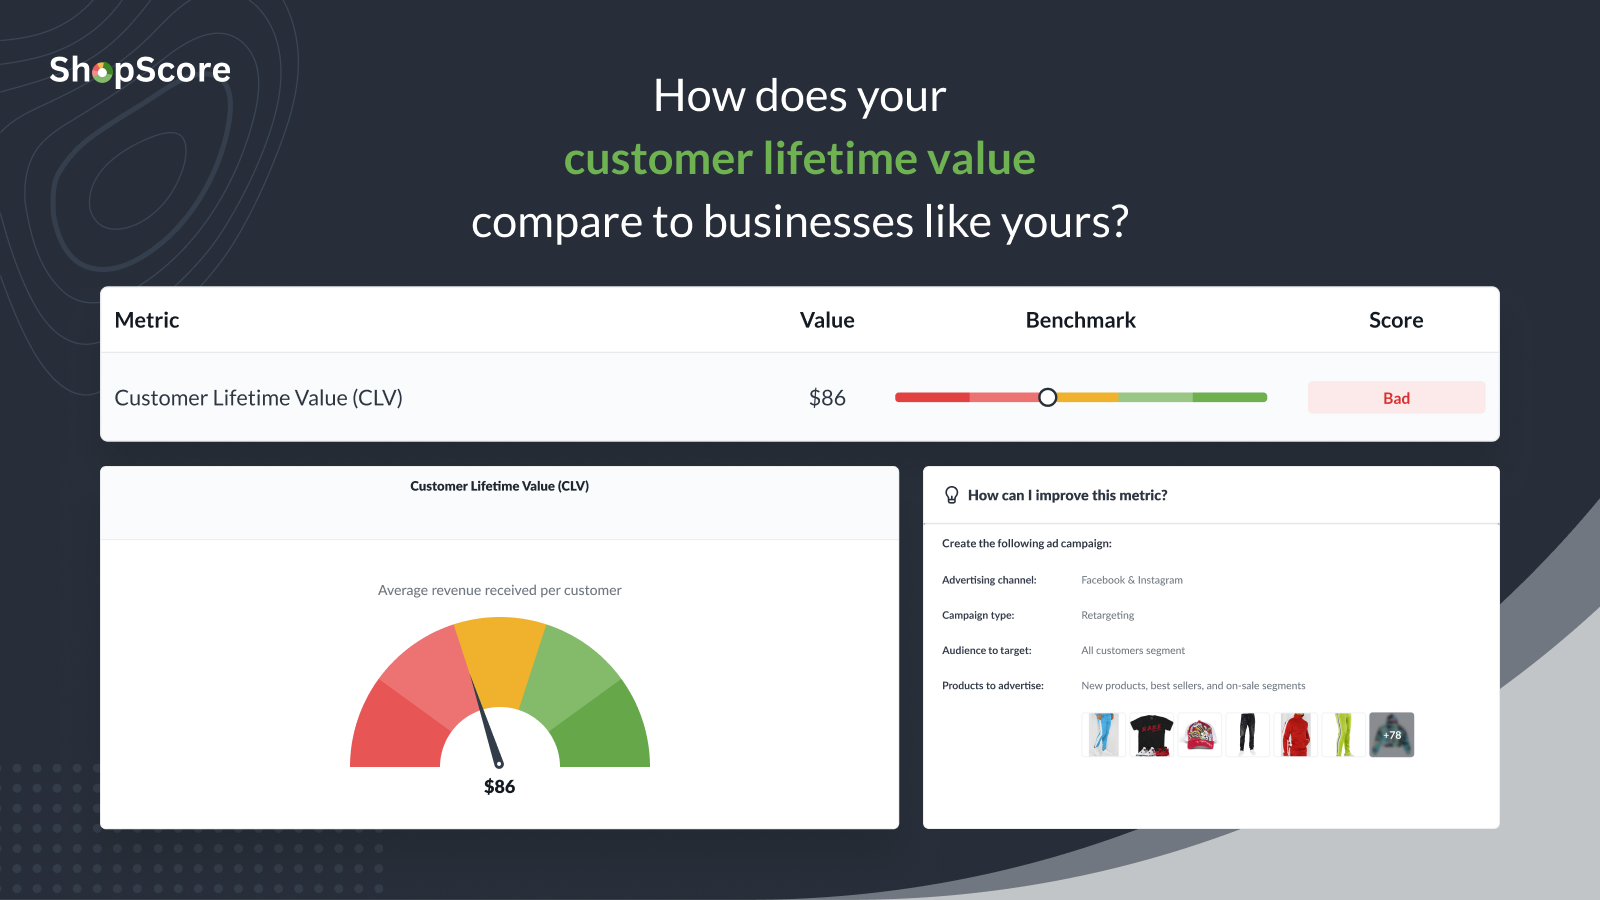 Compare your customer lifetime value to your competitors